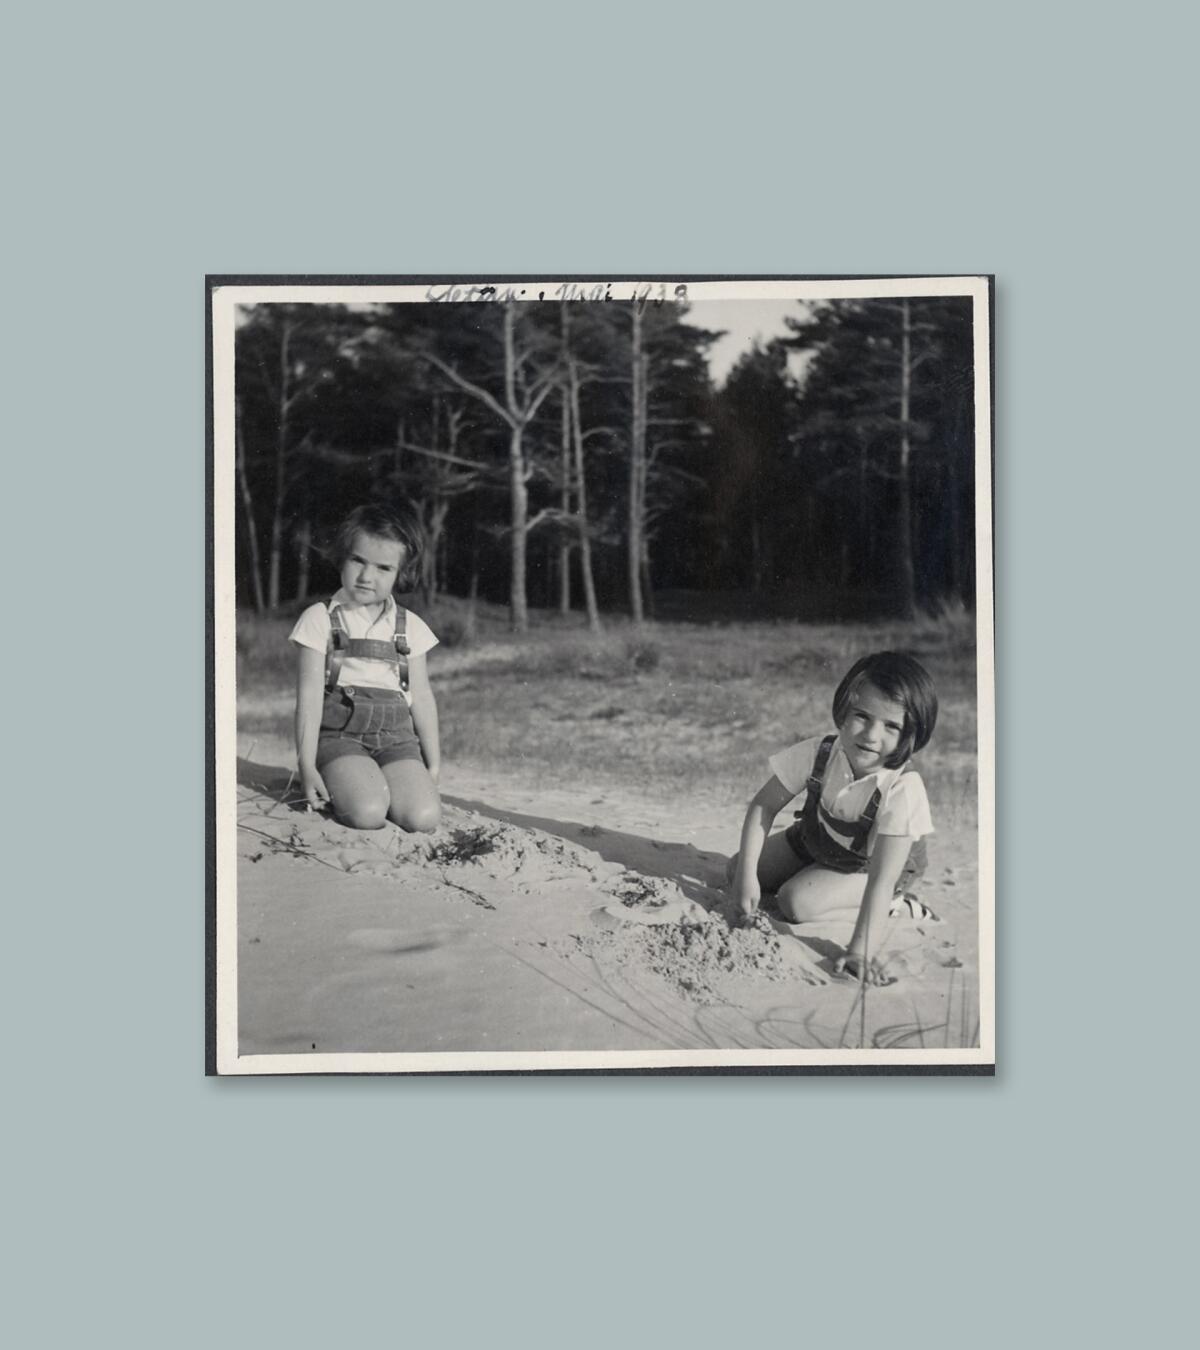 A photograph of Betsy Kaplan with her twin sister as children playing in the sand.